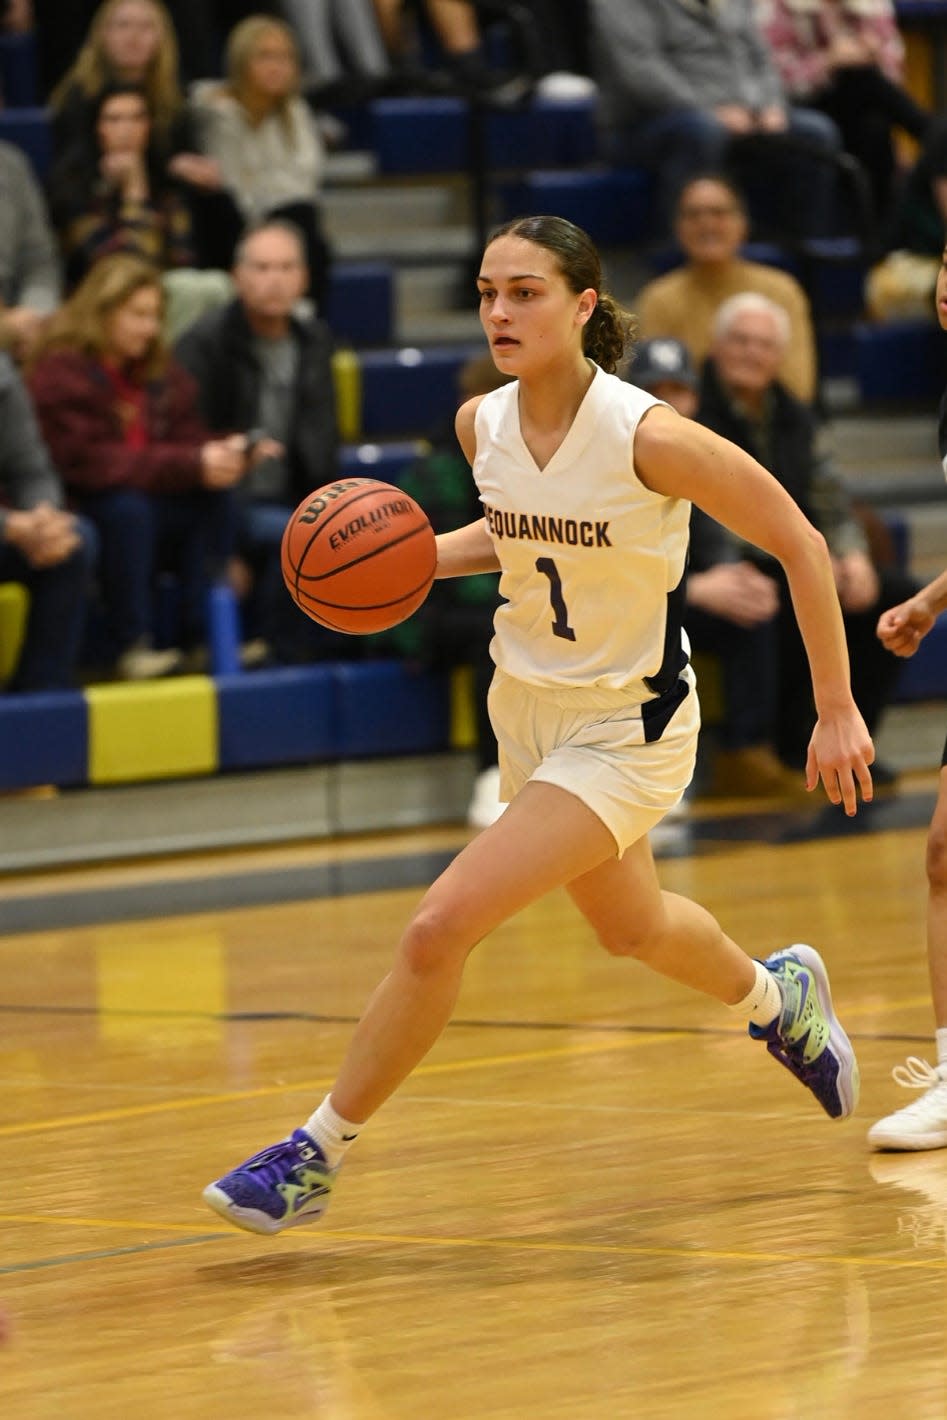 Pequannock junior point guard Chloe Vasquez scored her 1,000th career point in a 40-28 victory against Hanover Park on Feb. 7, 2023.